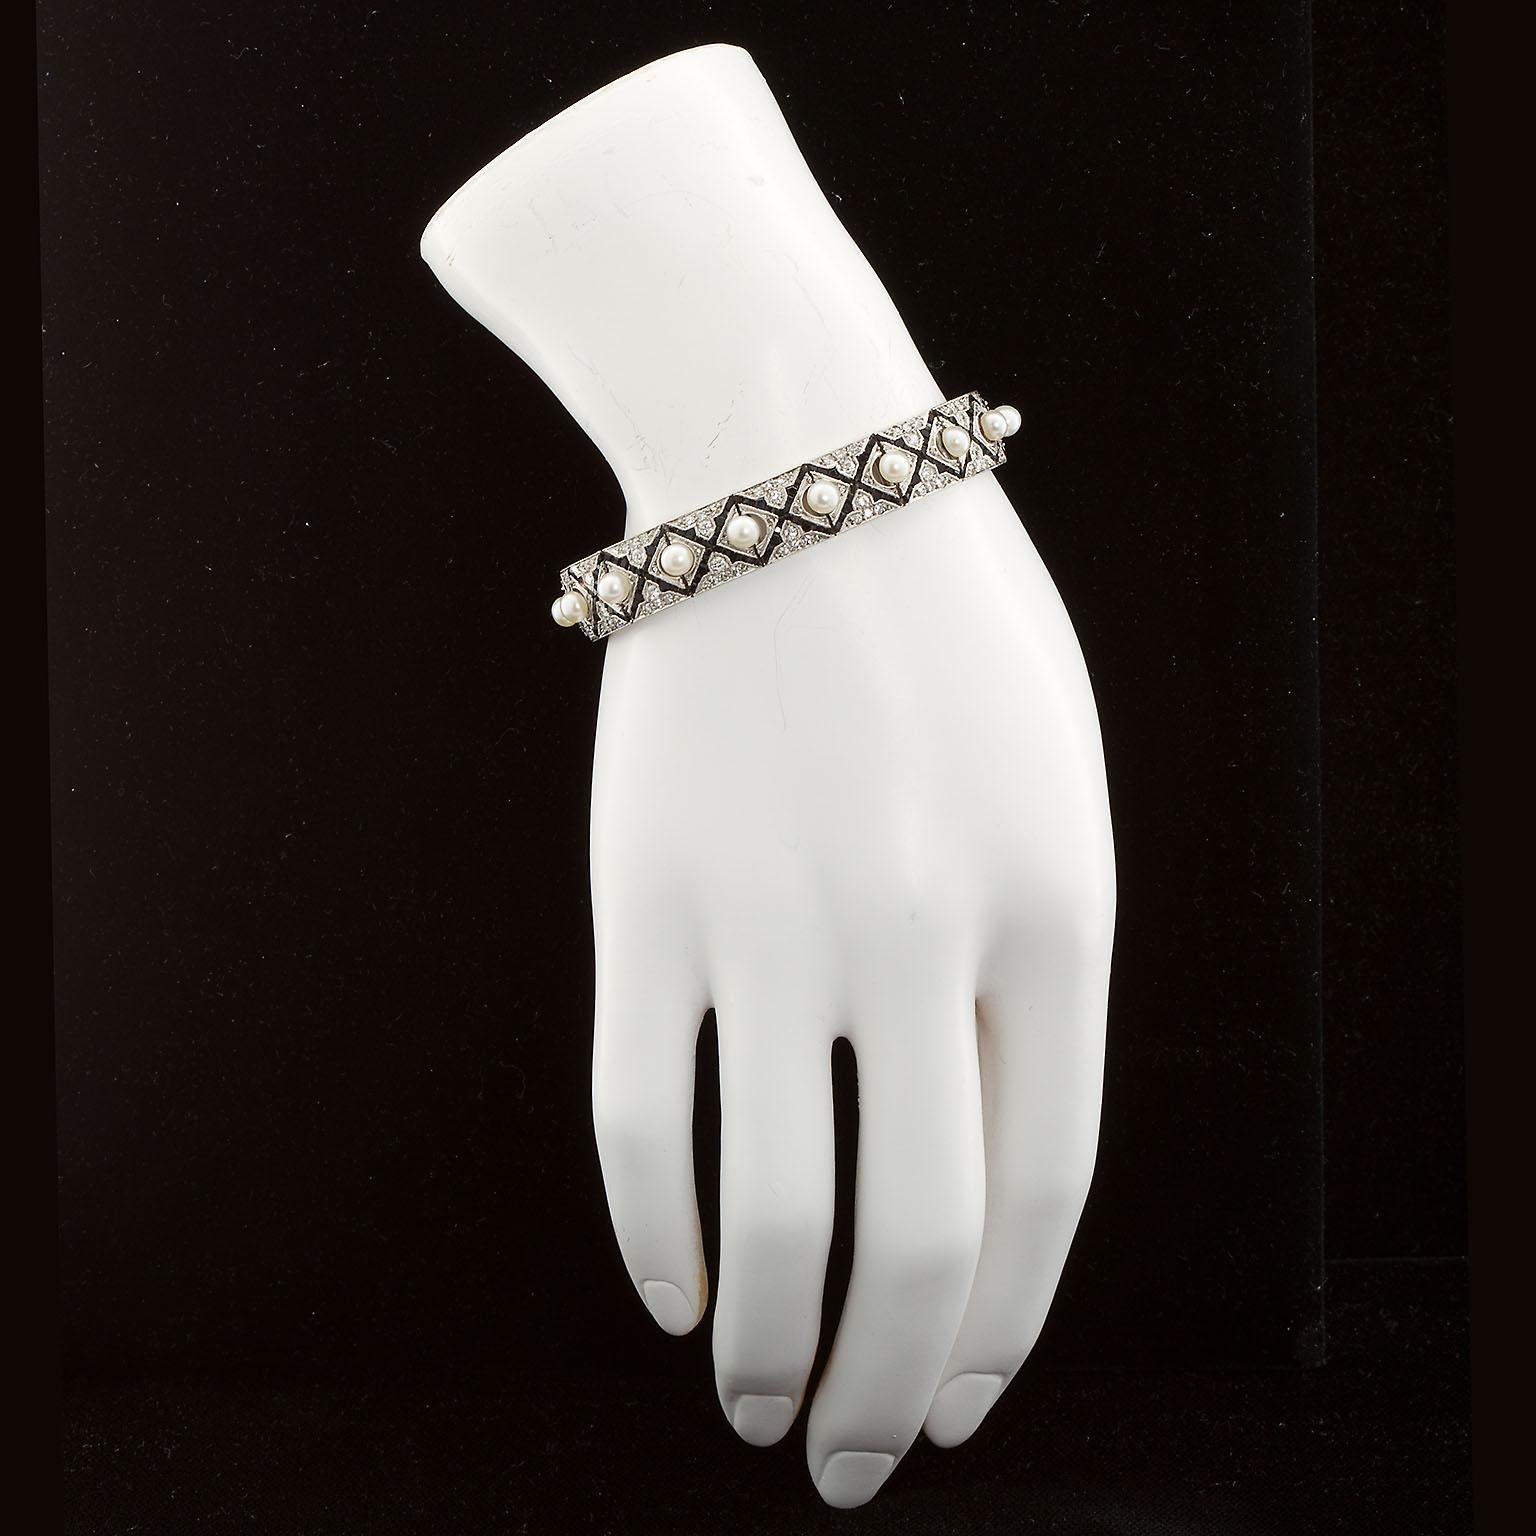 A very fine Art Deco period platinum and 18k gold bracelet with full-cut diamonds and calibrated onyx motif and cultured pearl centers. Fine craftsmanship throughout. The micro-setting of the diamonds and onyx is matched by the carefully centered